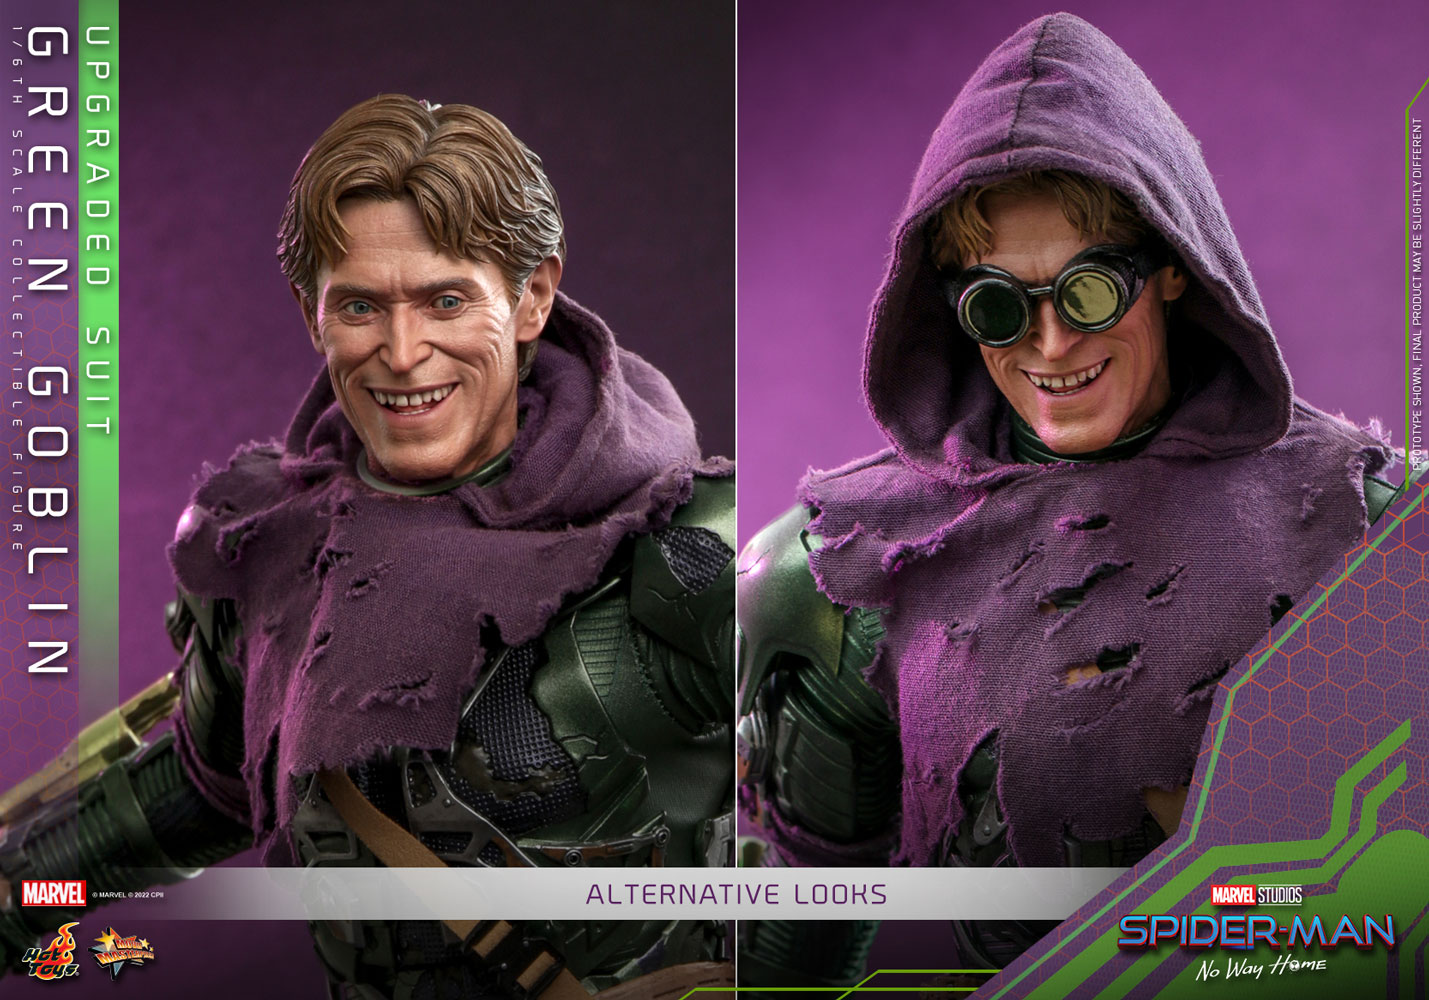 Green Goblin (Upgraded Suit) Sixth Scale Figure by Hot Toys